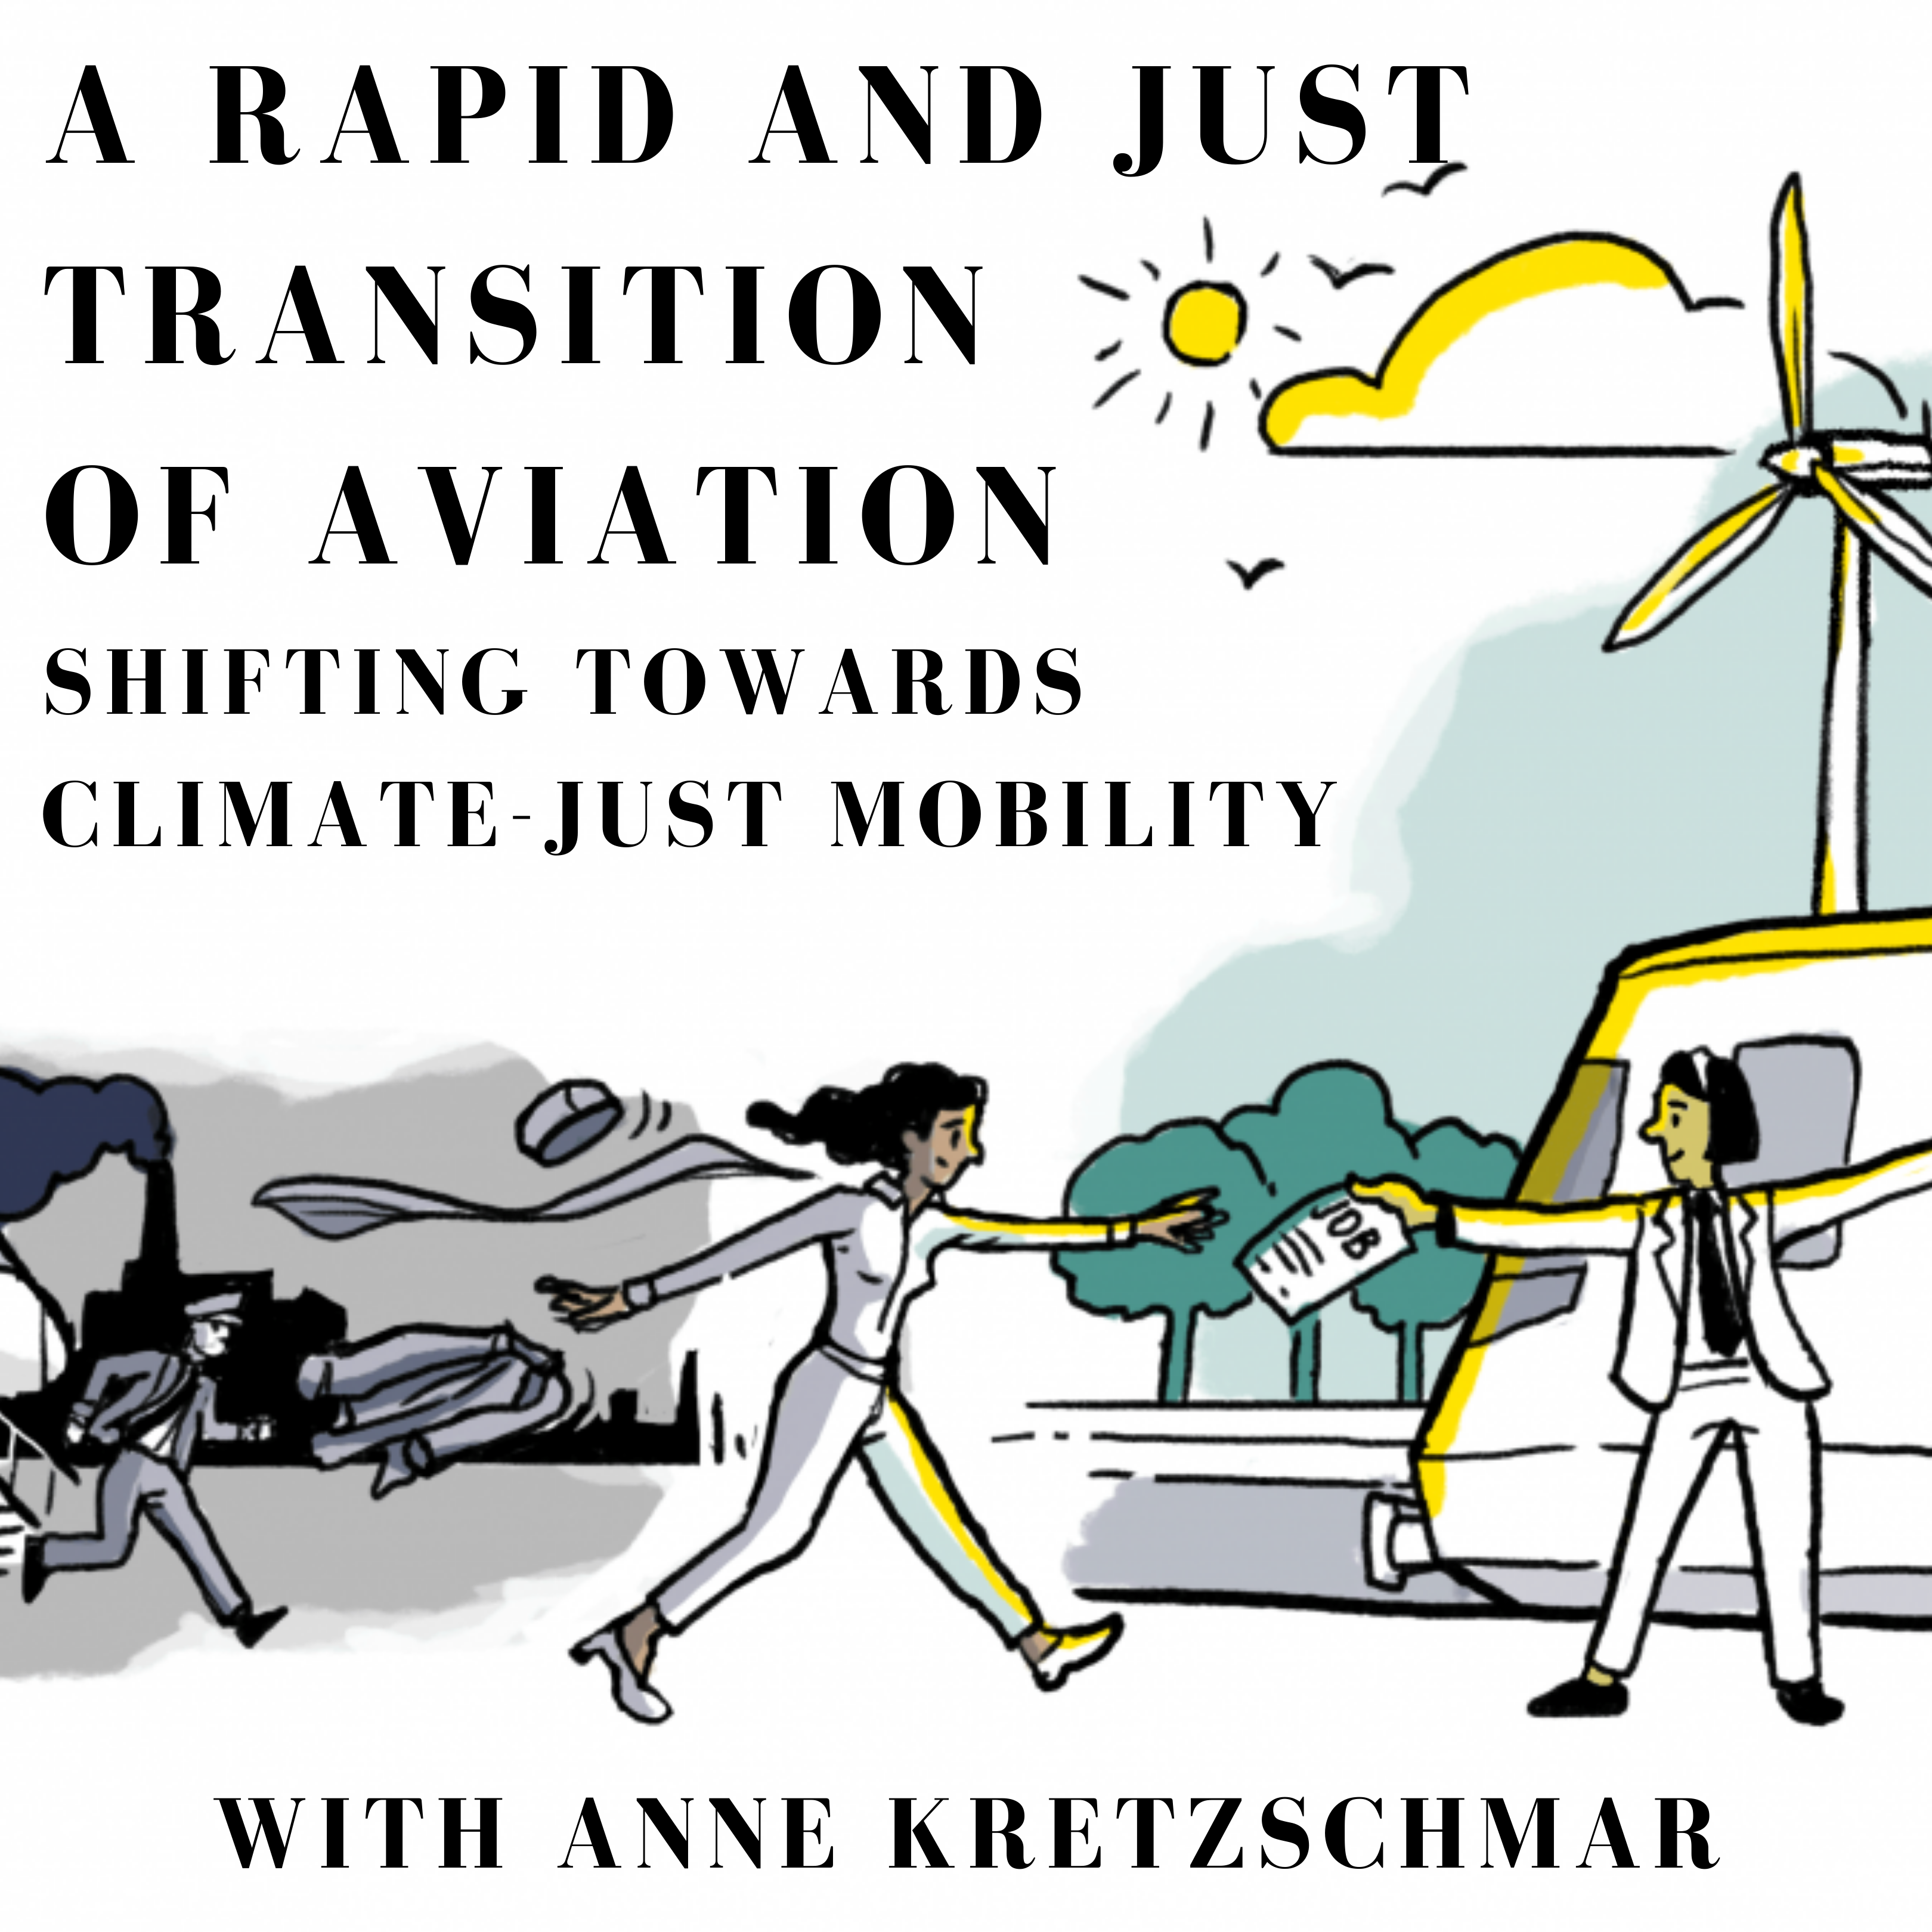 65/ A Rapid and Just Transition of Aviation: Shifting towards climate-just mobility (with Anne Kretzschmar)